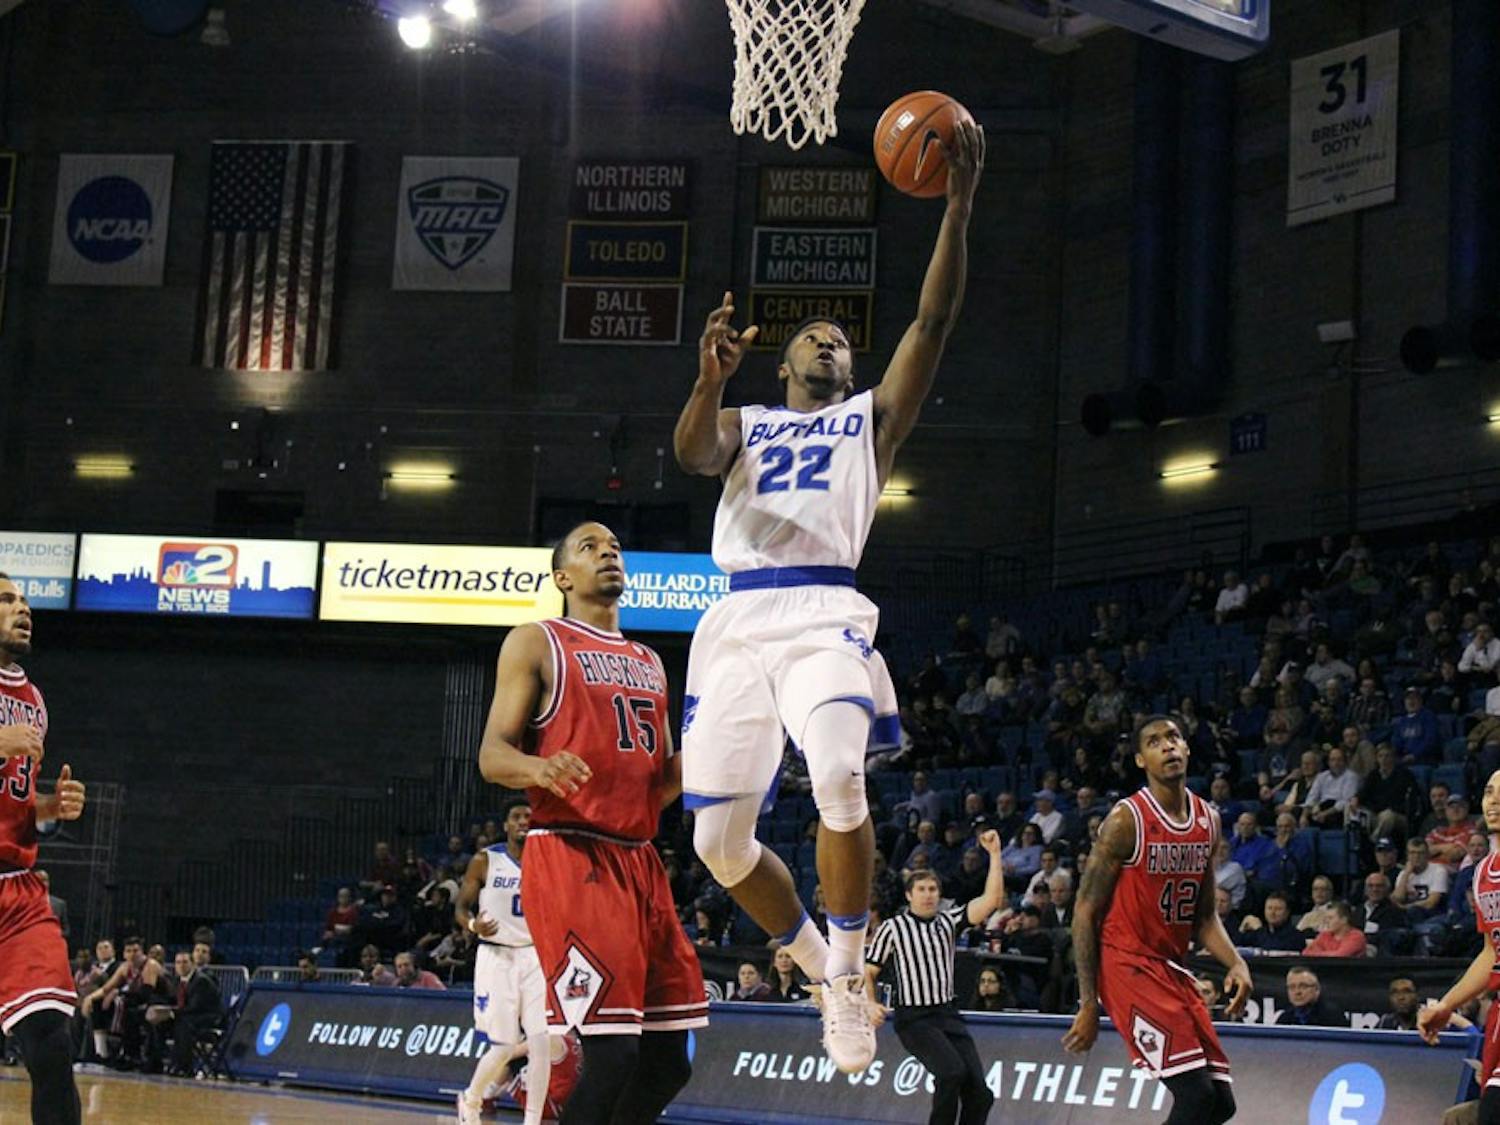 Sophomore guard Dontay Caruthers takes a layup against Northern Illinois. UB men’s basketball has been playing their best basketball of the season lately.